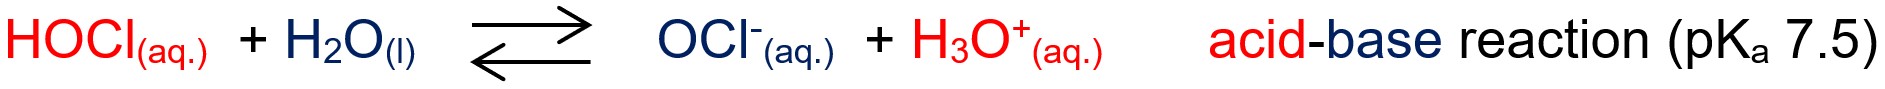 Acid-base reaction of hypochlorous acid and water to yield hypochlorite anion and hydronium cation